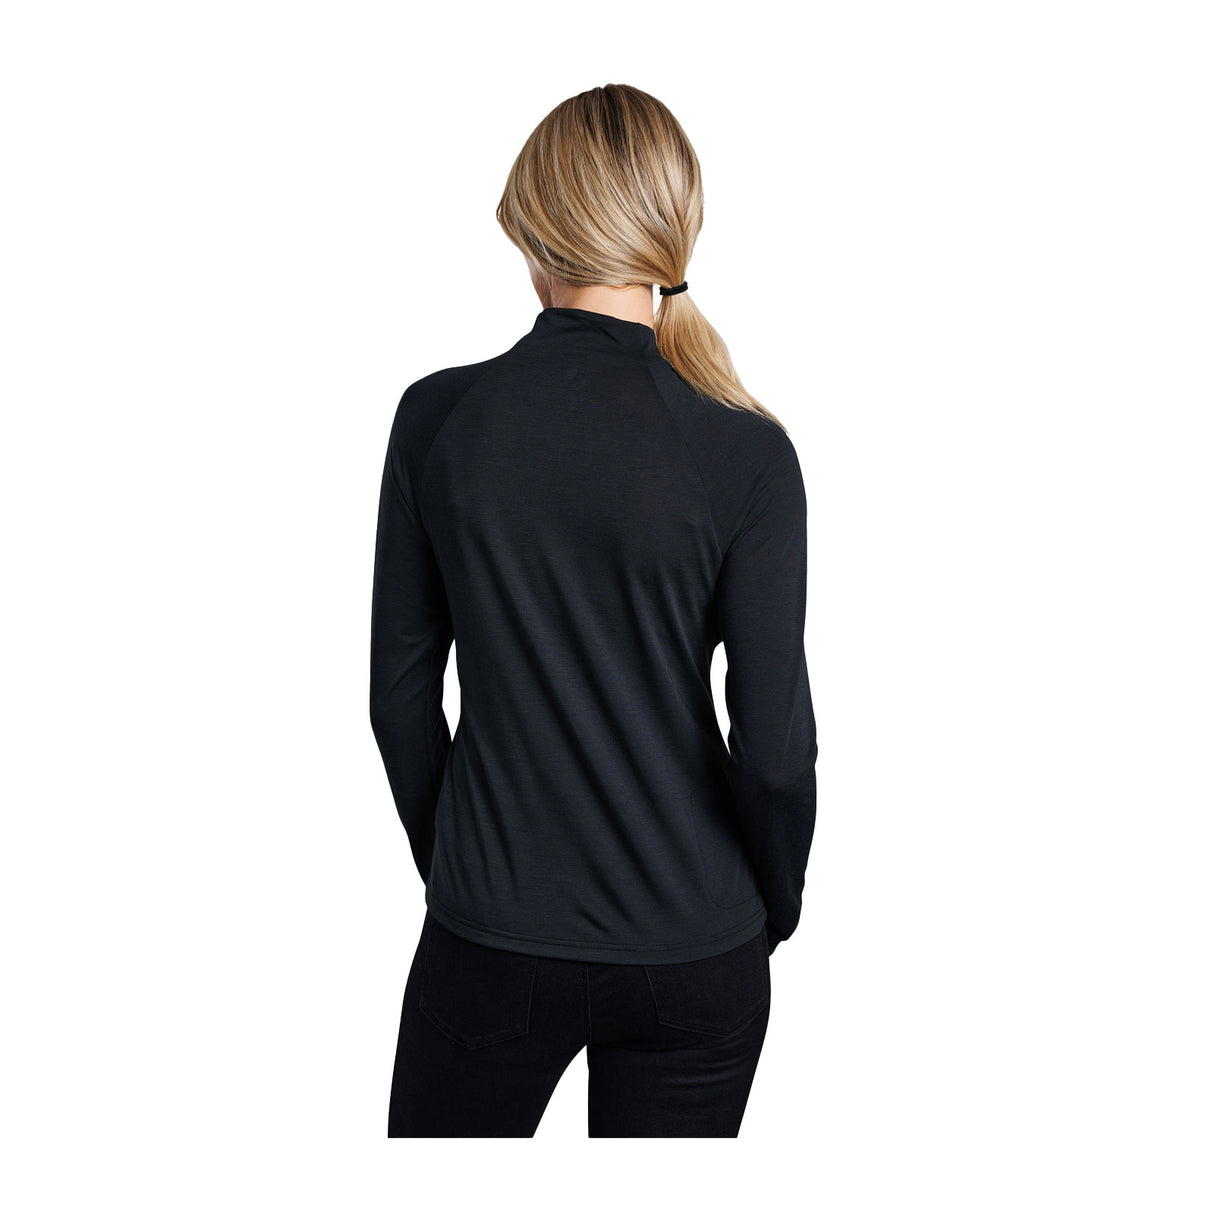 Kuhl Agility Pullover (Women) - Black Apparel - Top - Long Sleeve - The Heel Shoe Fitters